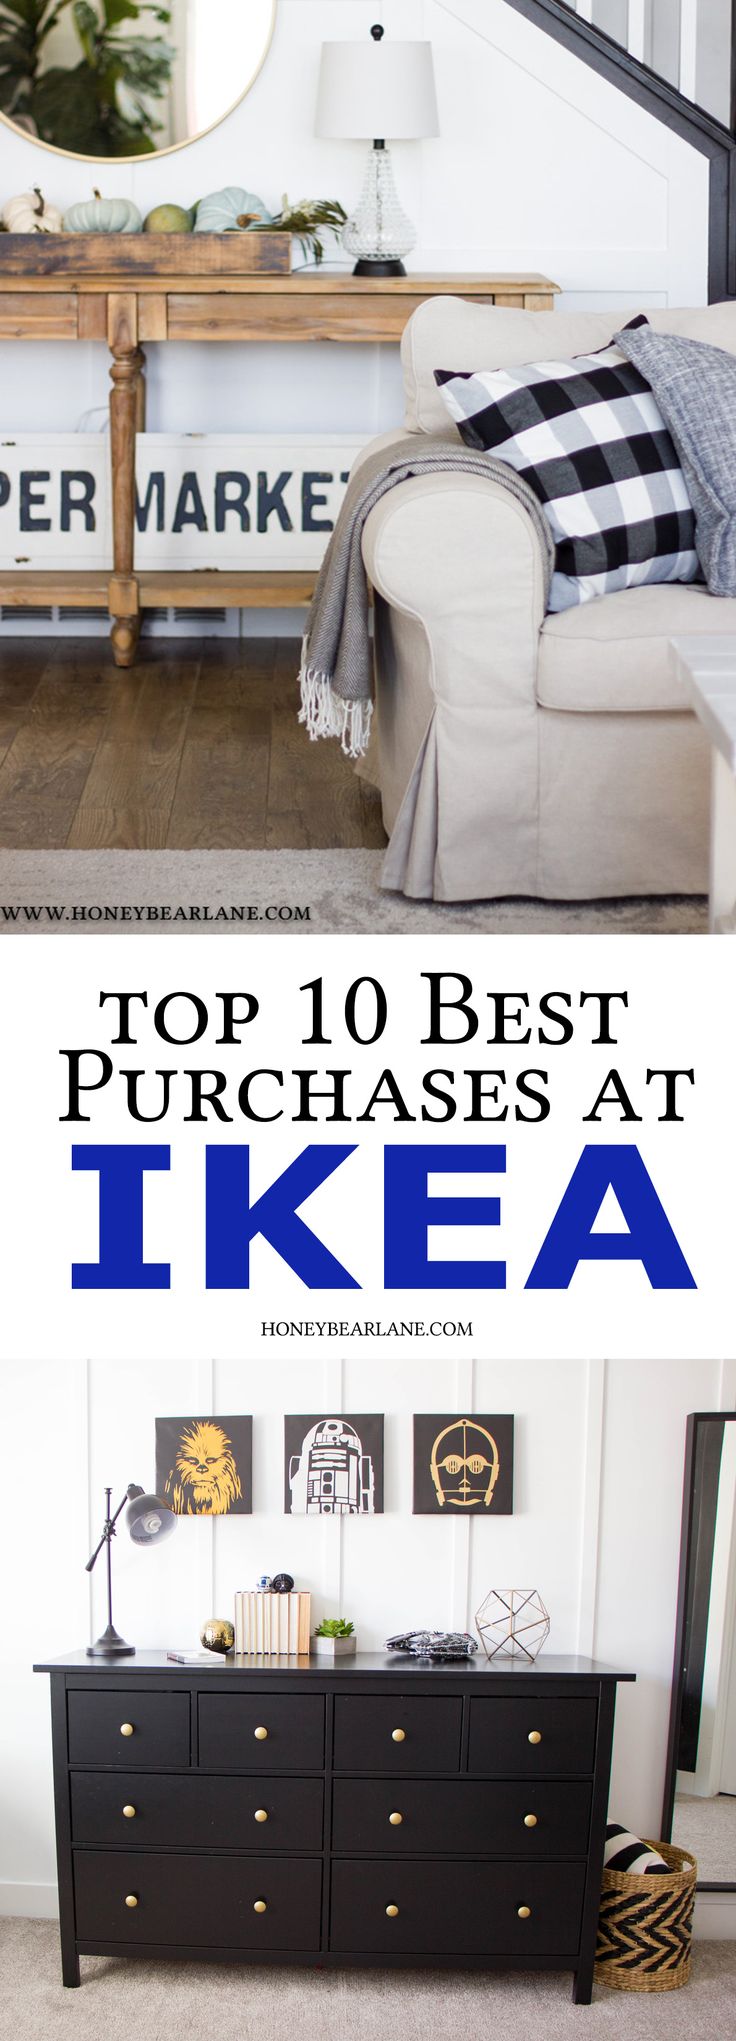 Top 10 Best IKEA Purchases